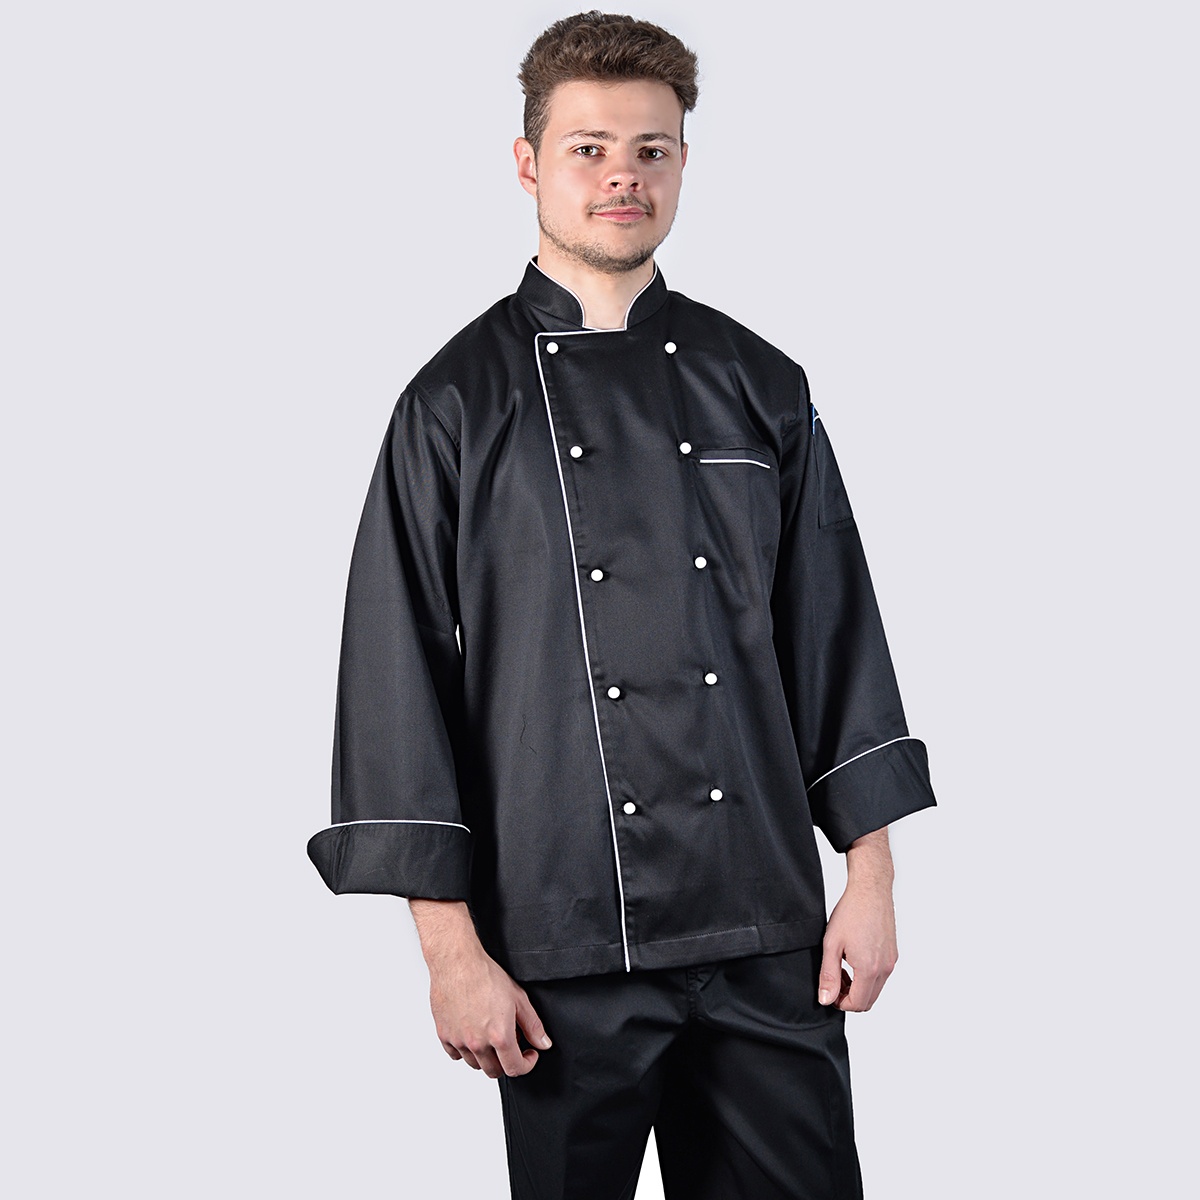 chef jacket black long sleeve with white piping